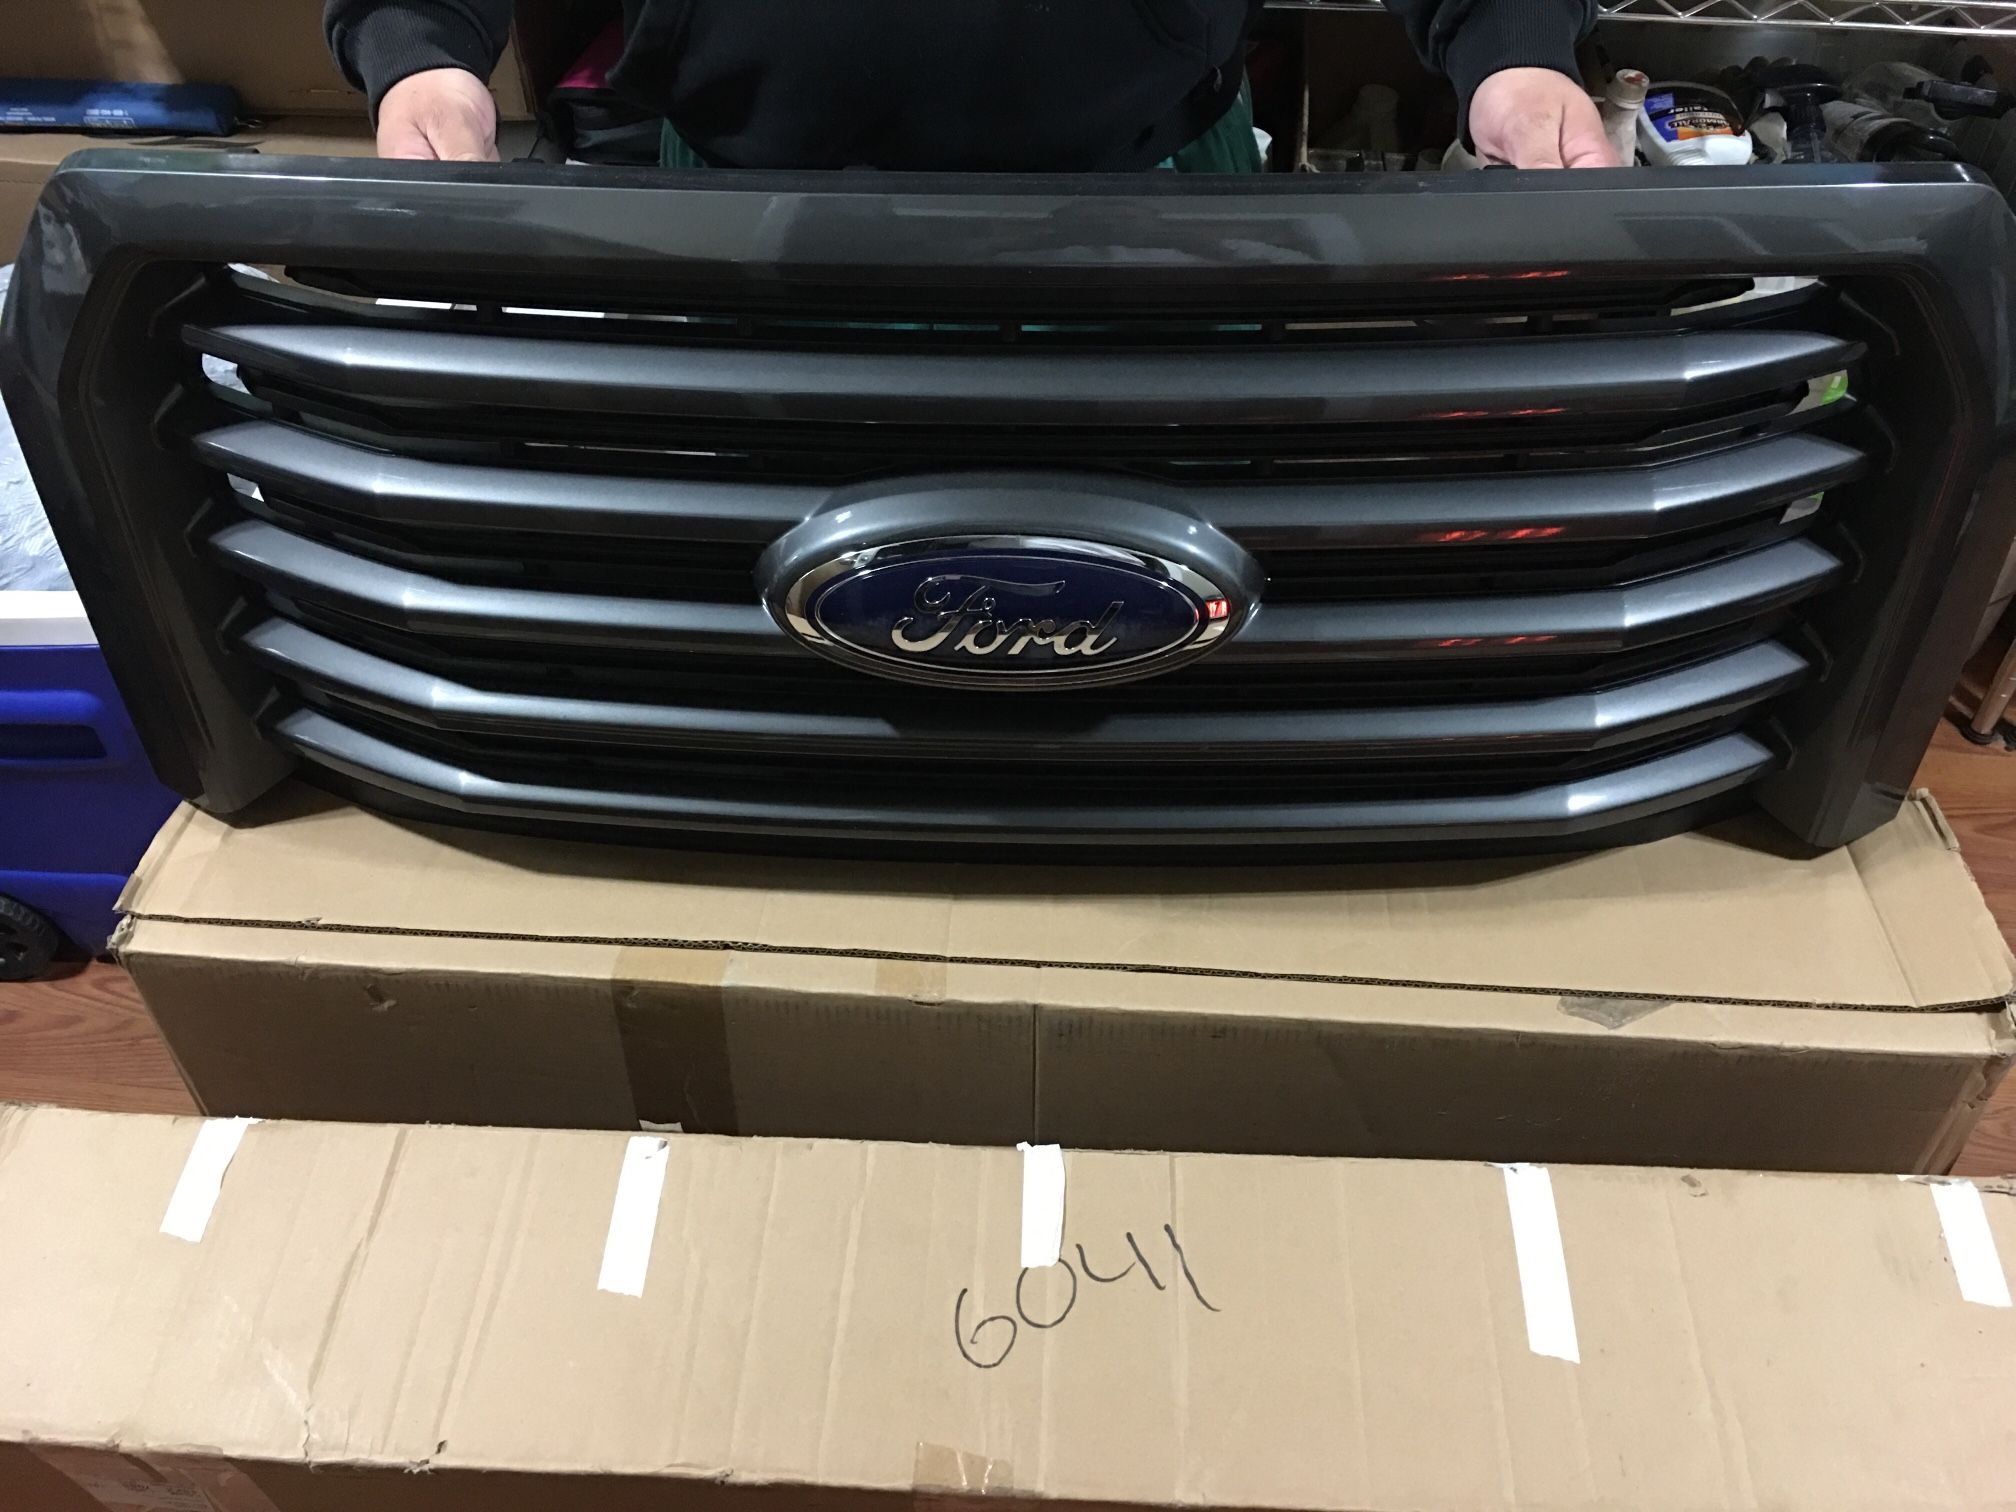 Ford F150 (oem Grille)